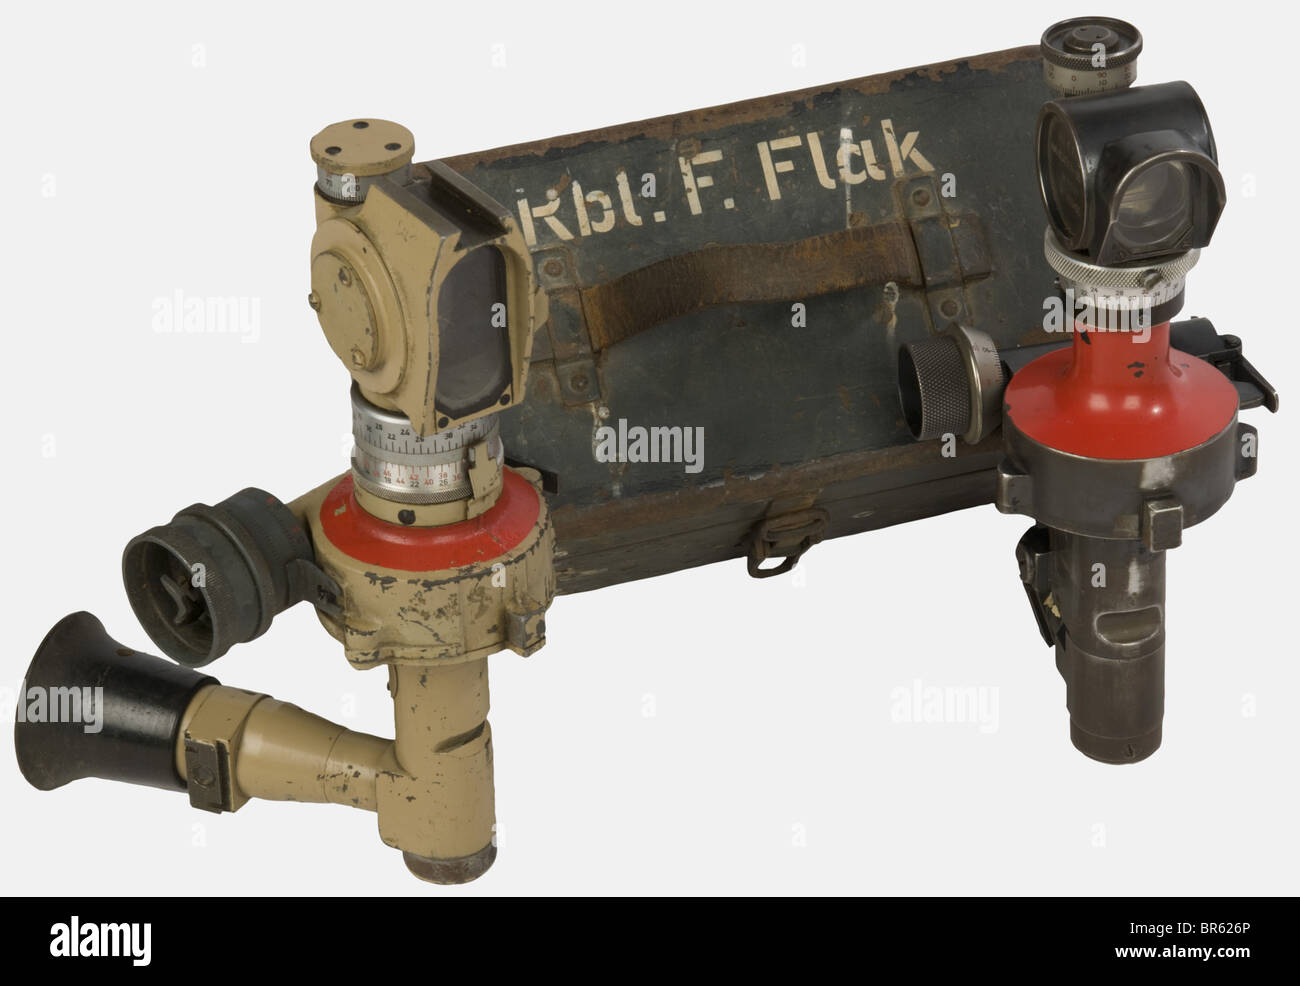 A group of German Army equipment, comprising a yellow 43 painted artillery sight made by 'bmj' pattern 'rblf.36' with serial number 571522, a feldgrau steel case with leather handle and marking 'Rbl.F.Flak' in white paint containing a Flak sight with graduated wooden rings and an aluminium tab inside the cover with instructions and picture of the sight, and a nice sight of blued steel painted red with aluminium graduated ring and hollow stamping 'Rbl.F Flak Navigation Berlin nr.11337 M H/6400'. historic, historical, 1930s, 1930s, 20th century, accessoir, access, Stock Photo